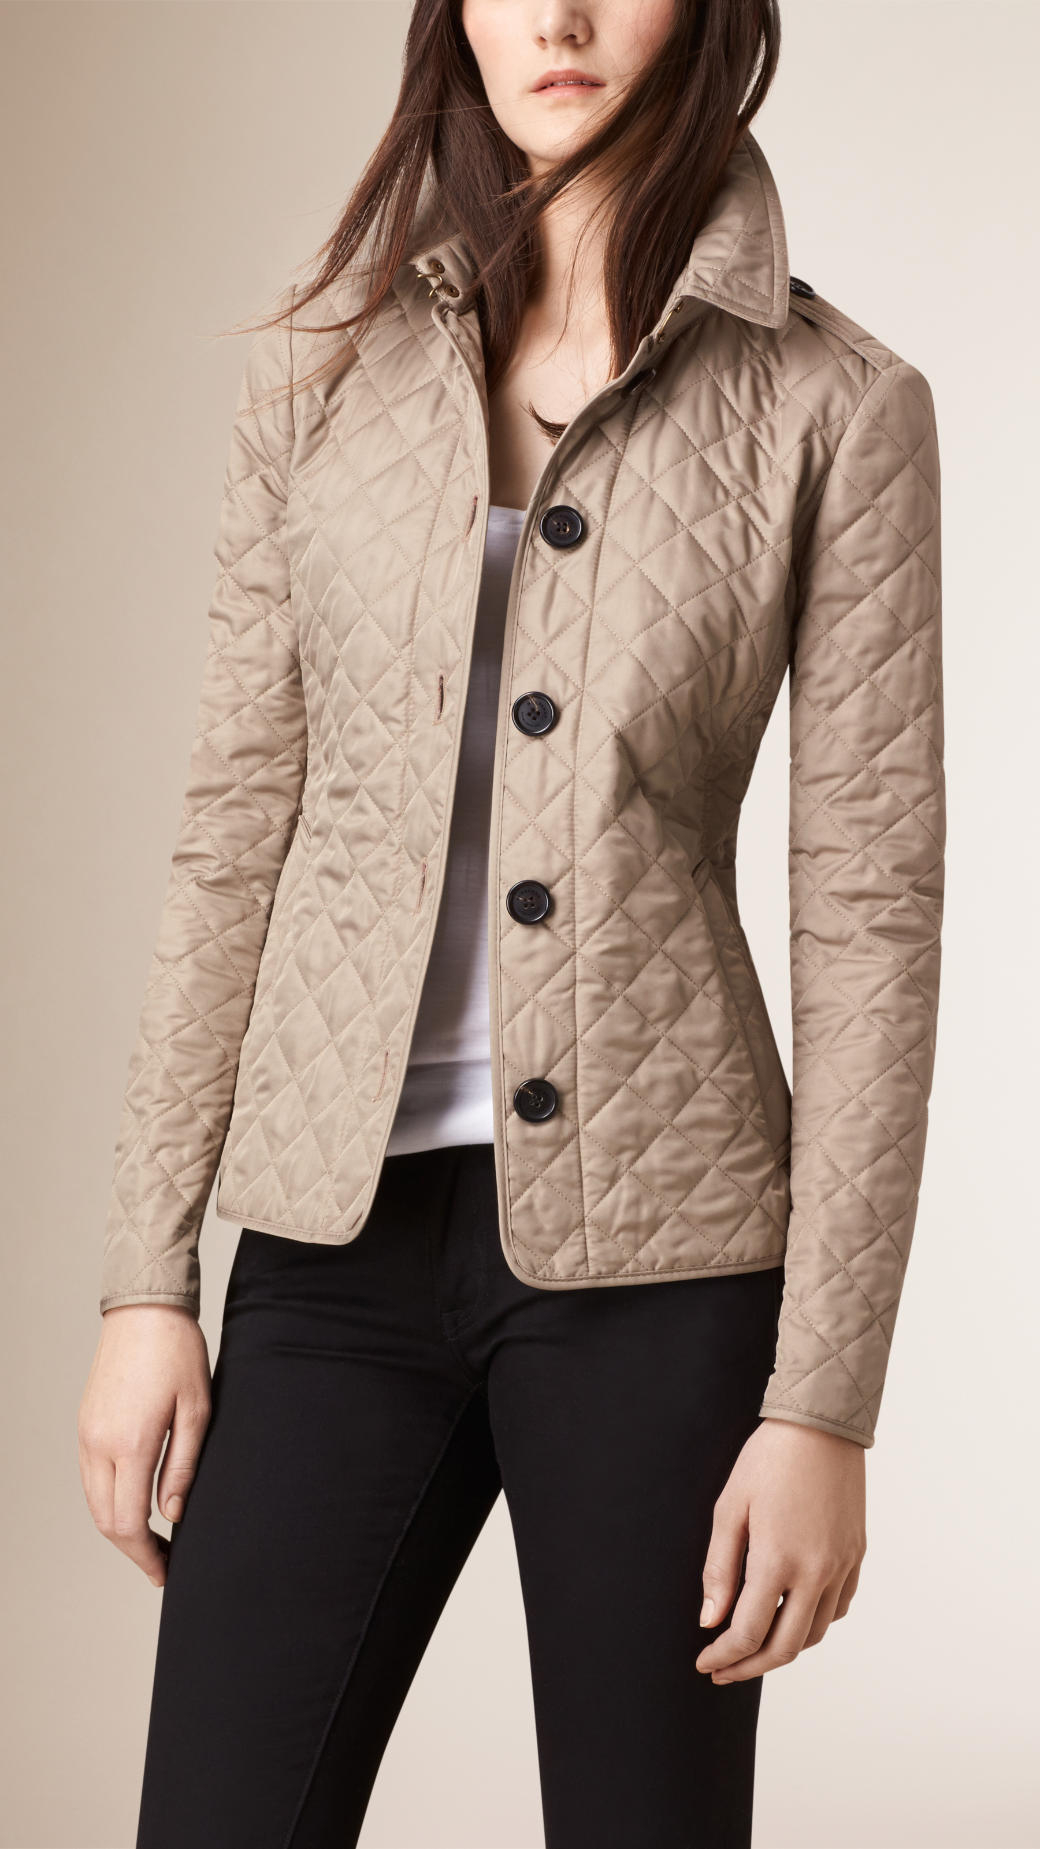 burberry diamond quilted jacket sale